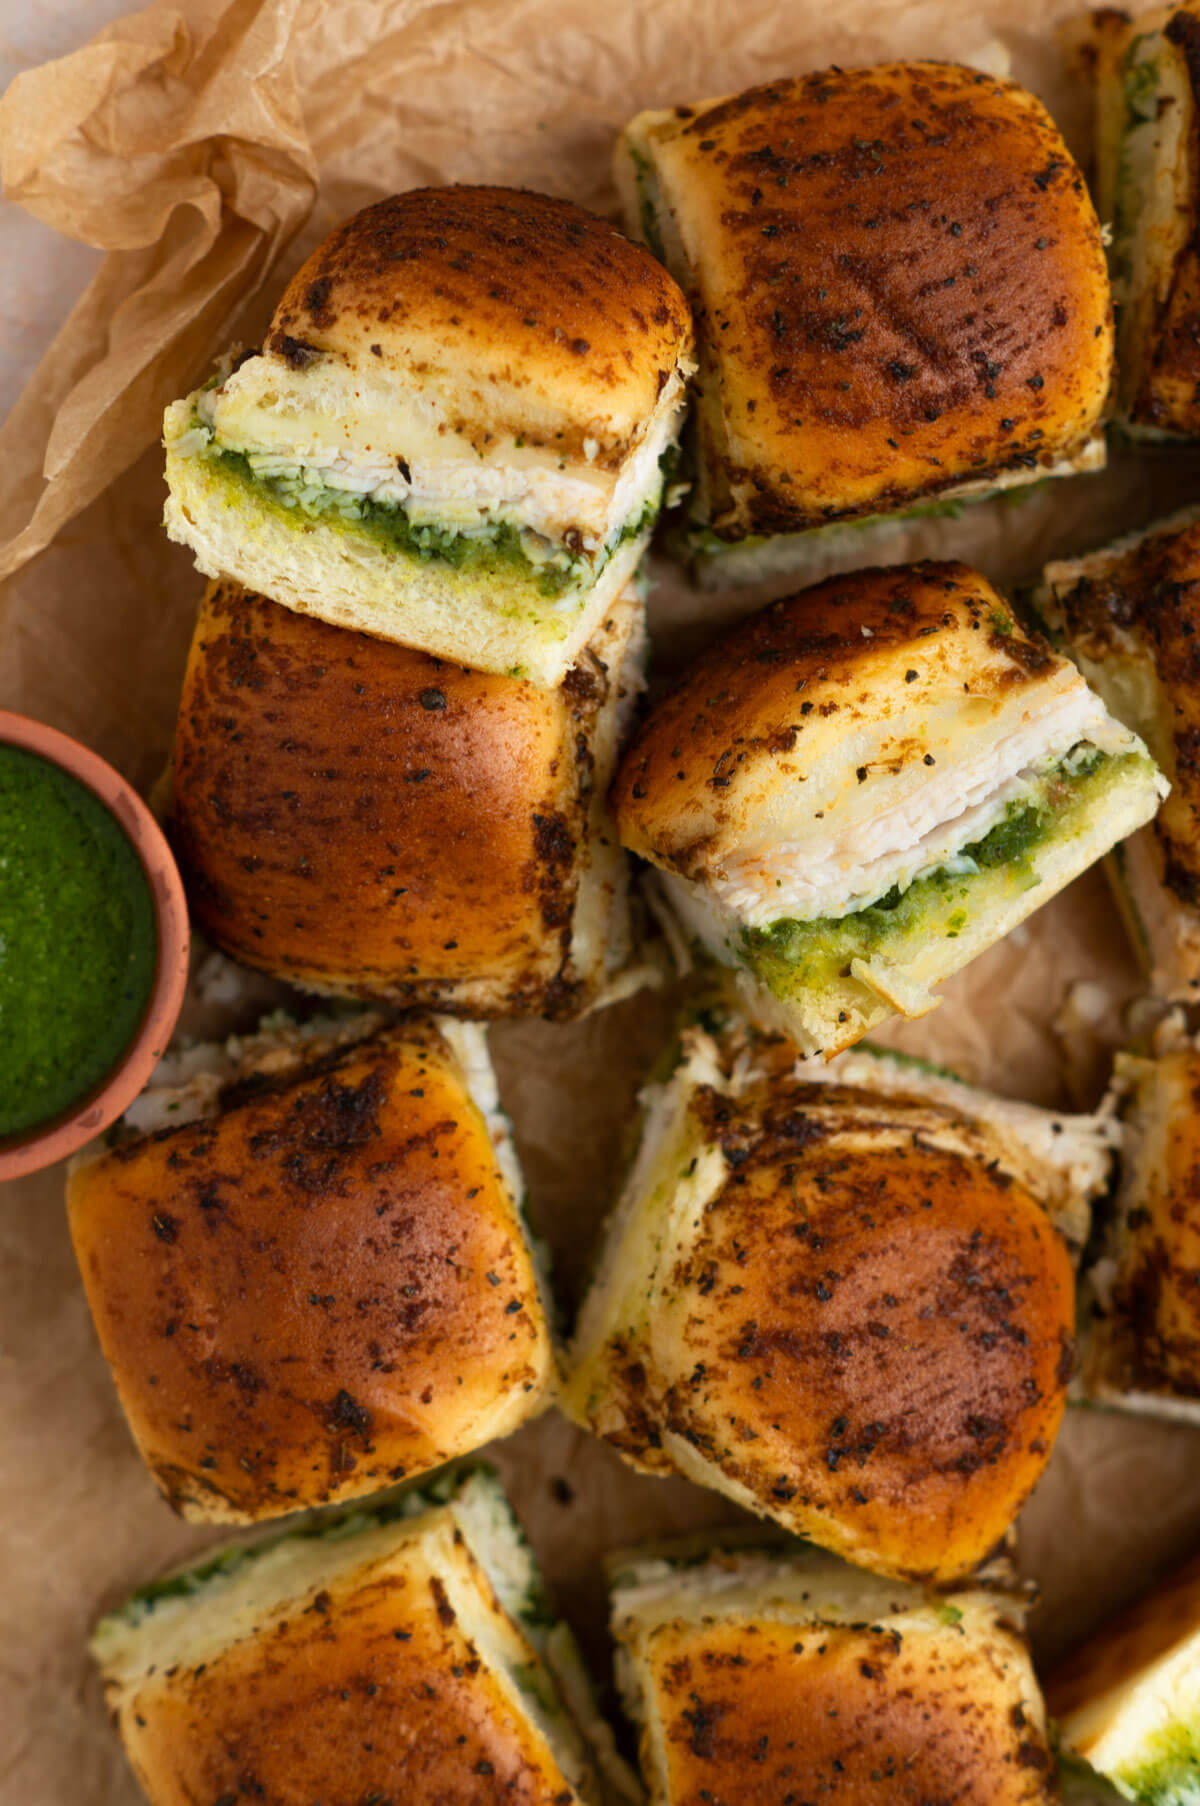 Eight pesto chicken sliders lined up with two sliders on their sides to show the contents of the sandwiches.